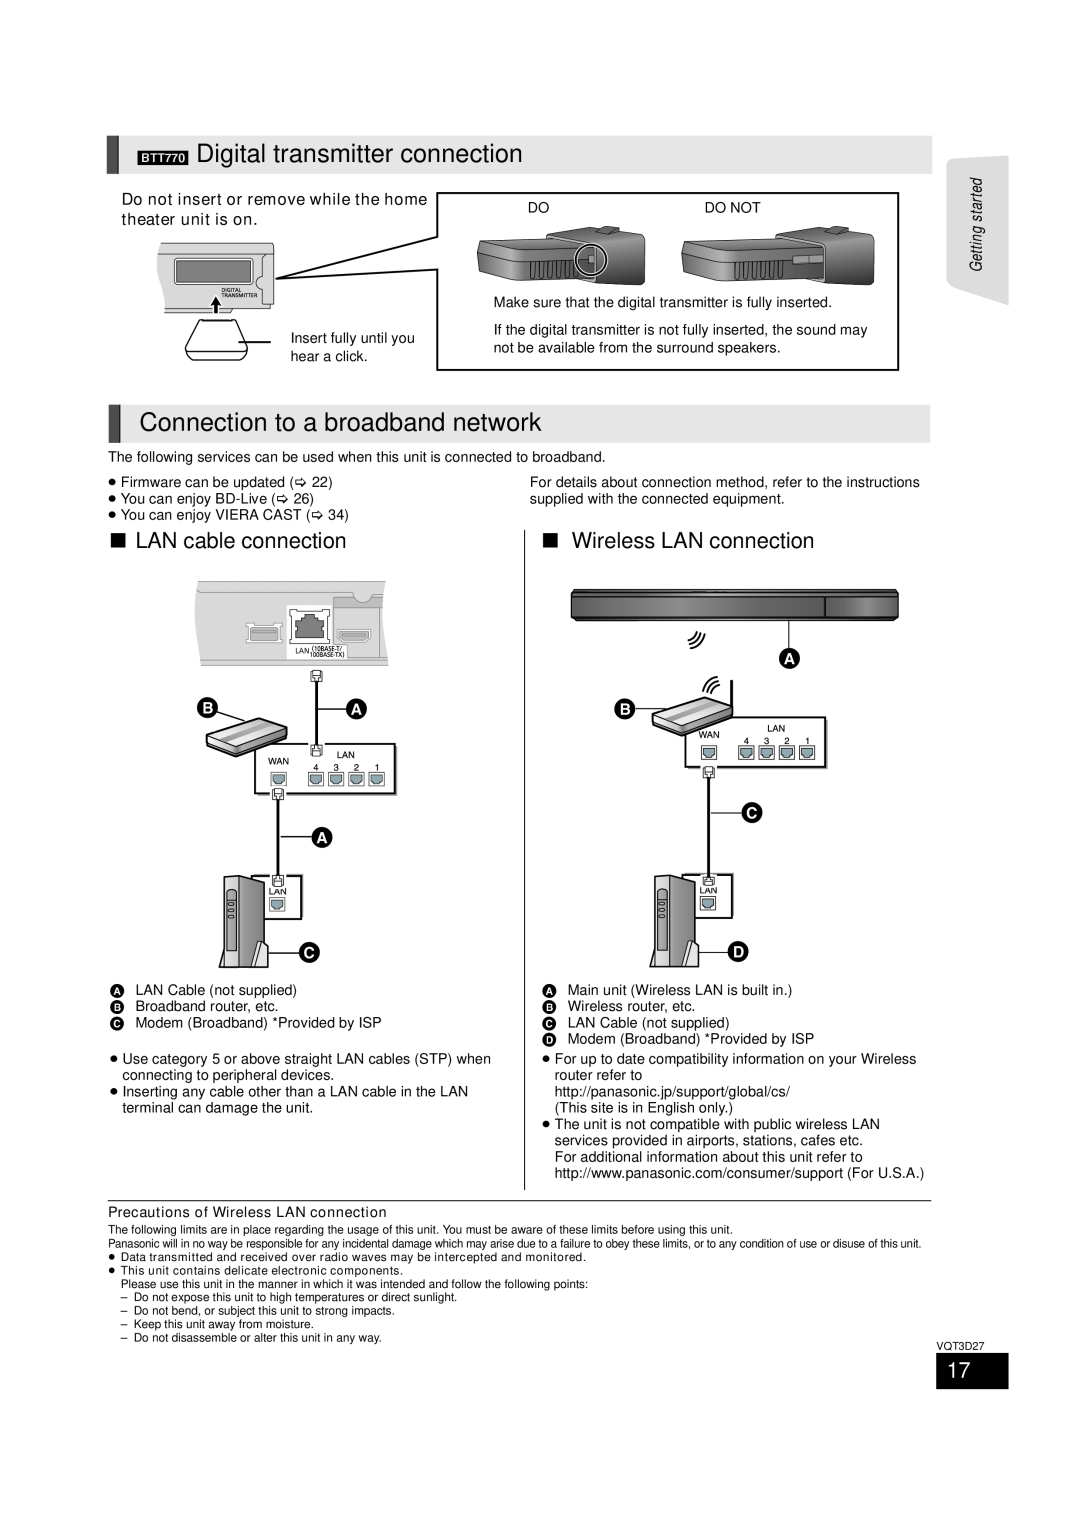 Panasonic SC-BTT370 BTT770 Digital transmitter connection, Connection to a broadband network, LAN cable connection,    